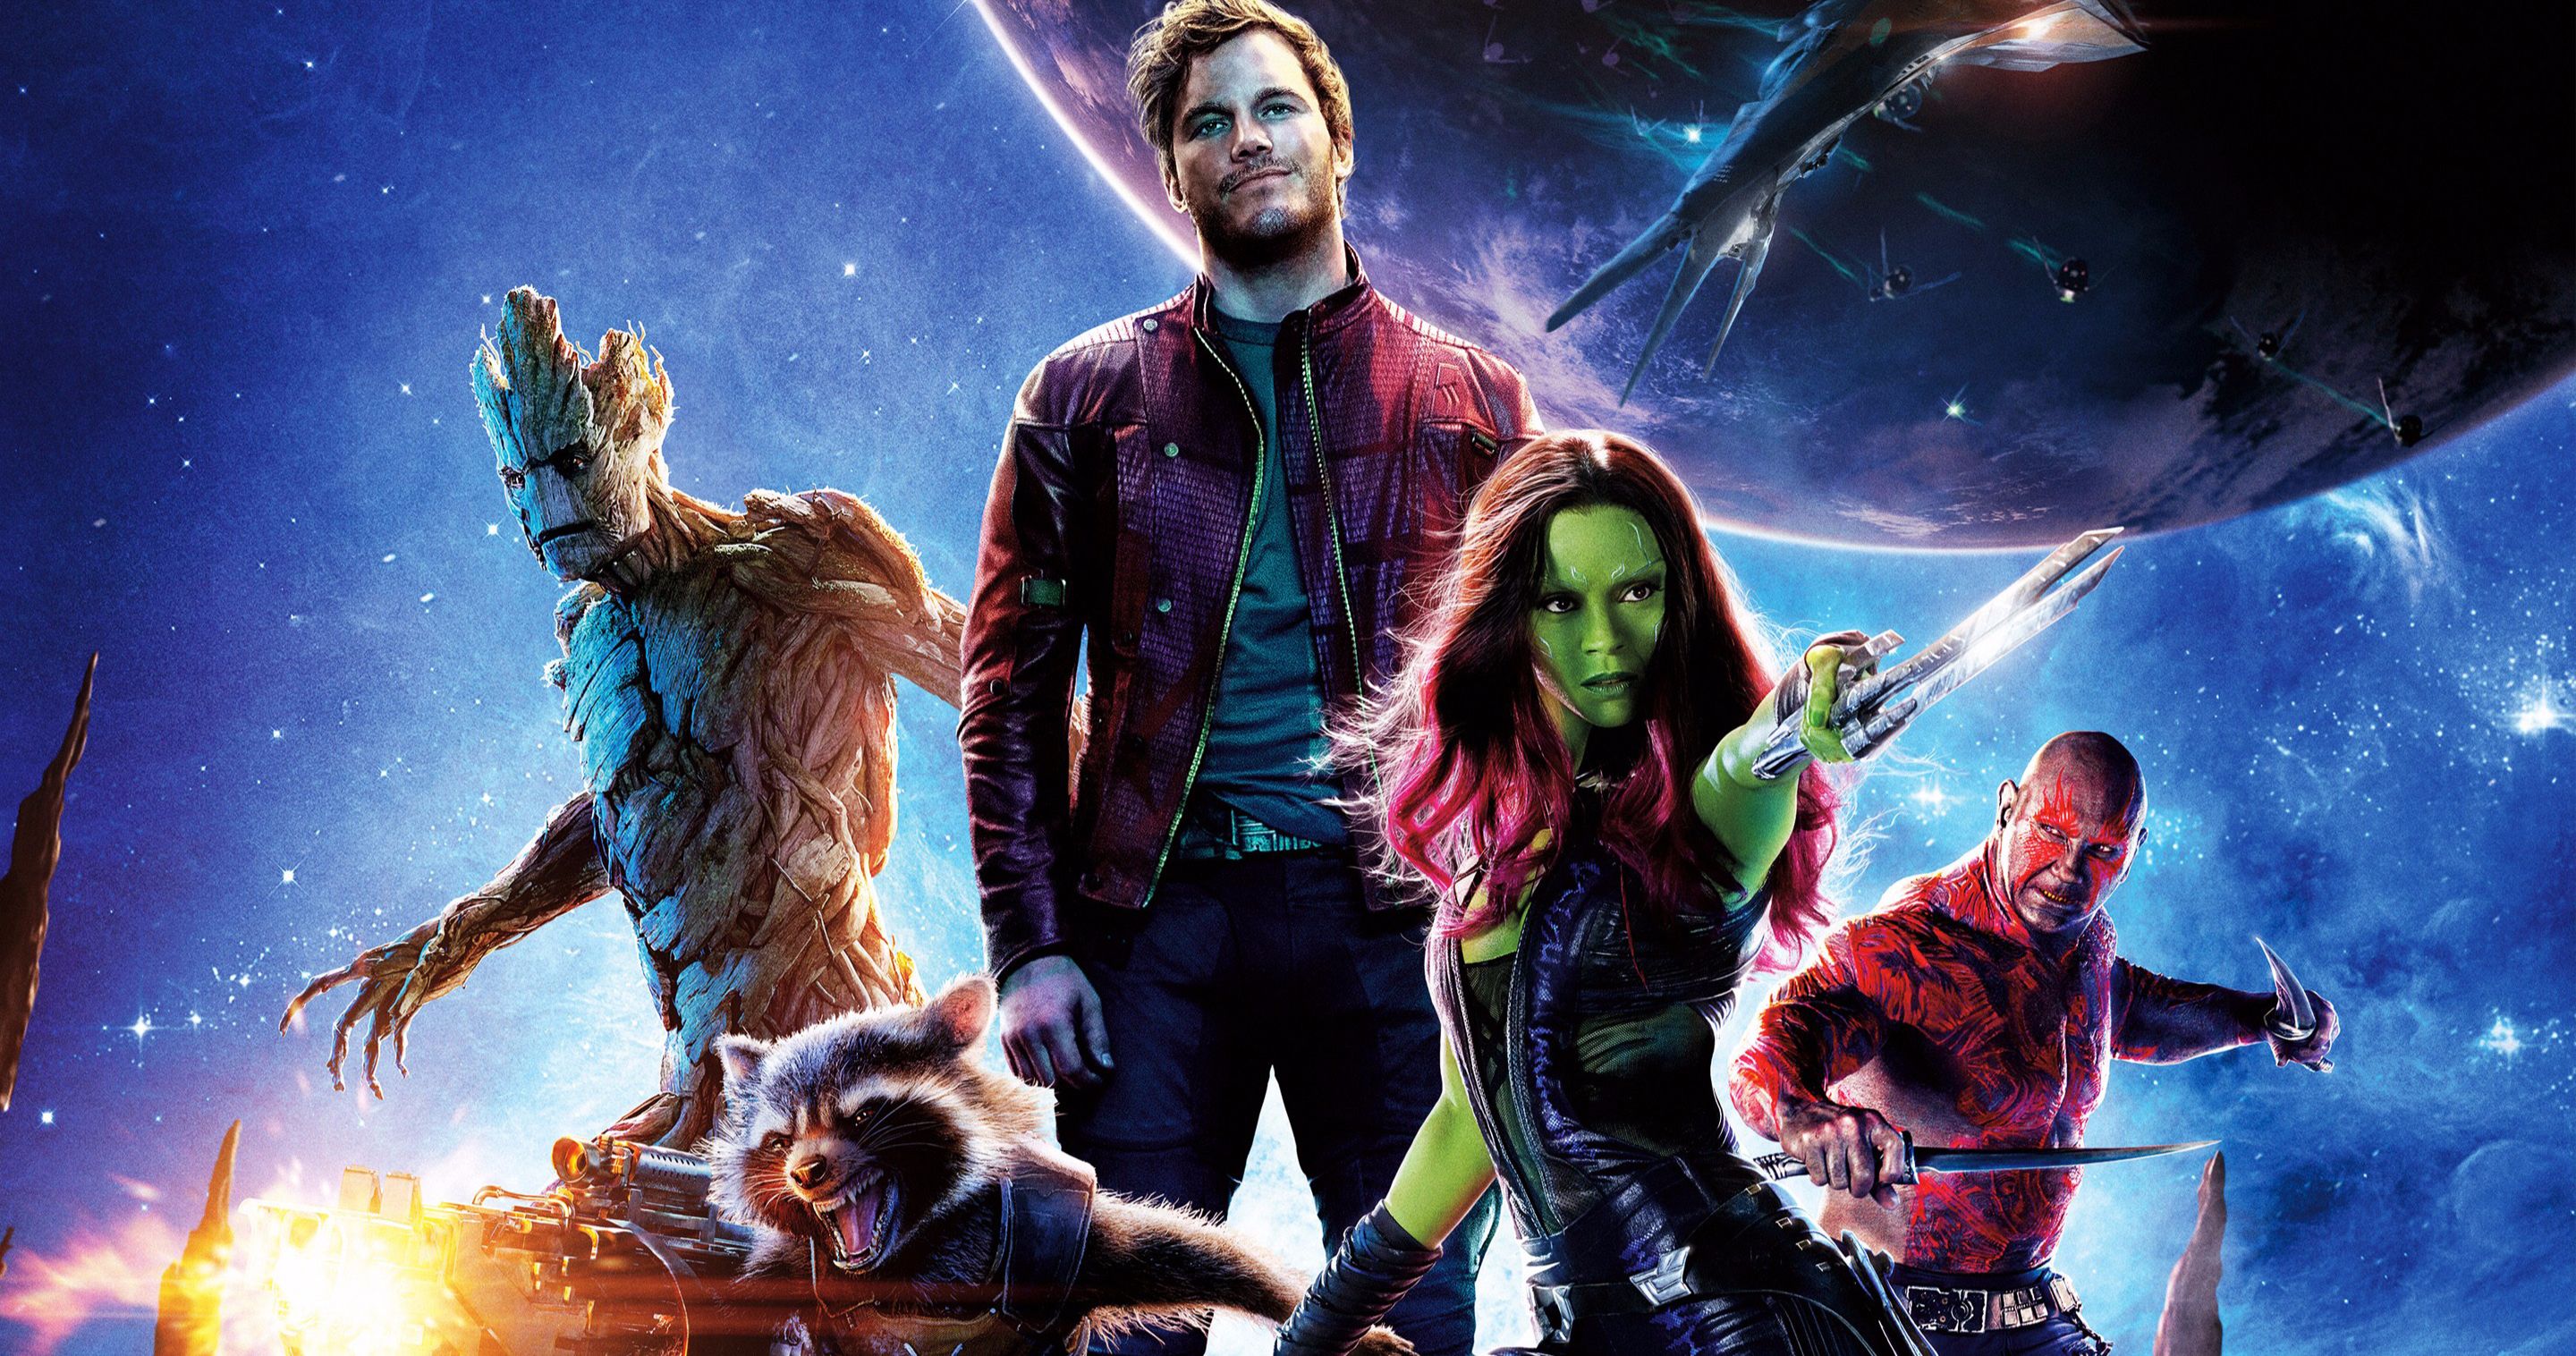 James Gunn Dreams of Rereleasing Guardians of the Galaxy with Missing Song &amp; New Footage